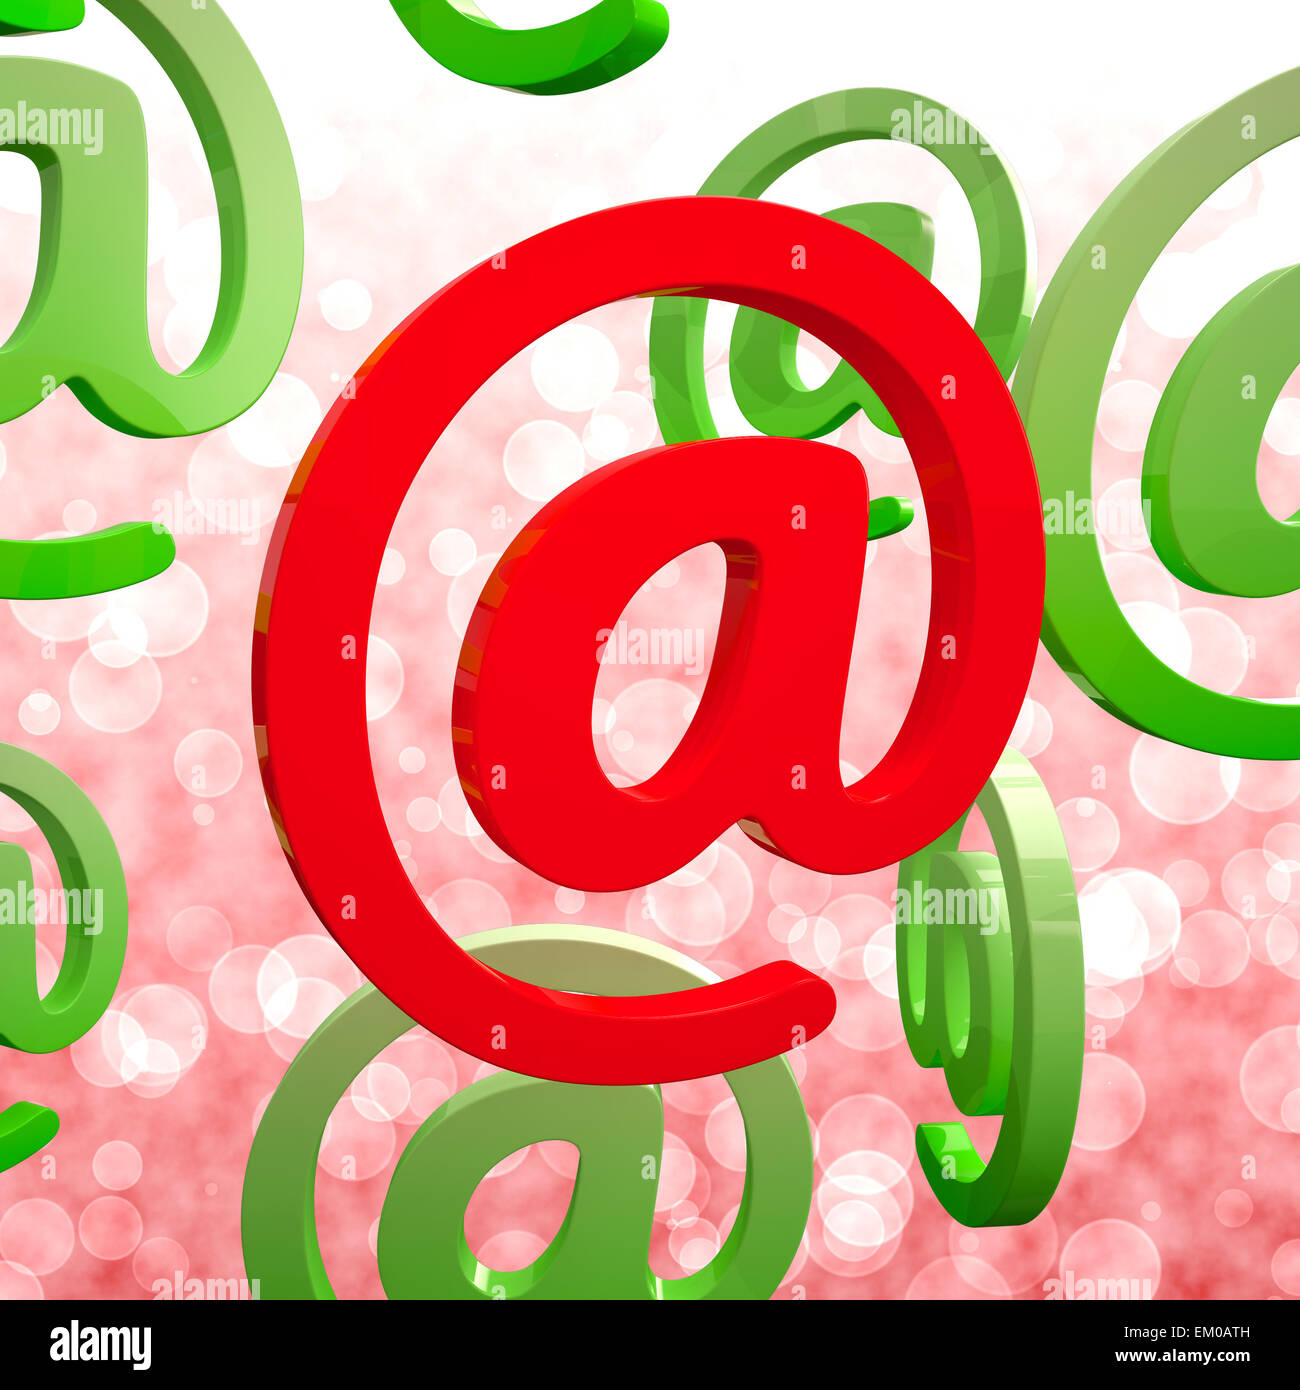 At Sign Means Email Correspondence on Web Stock Photo